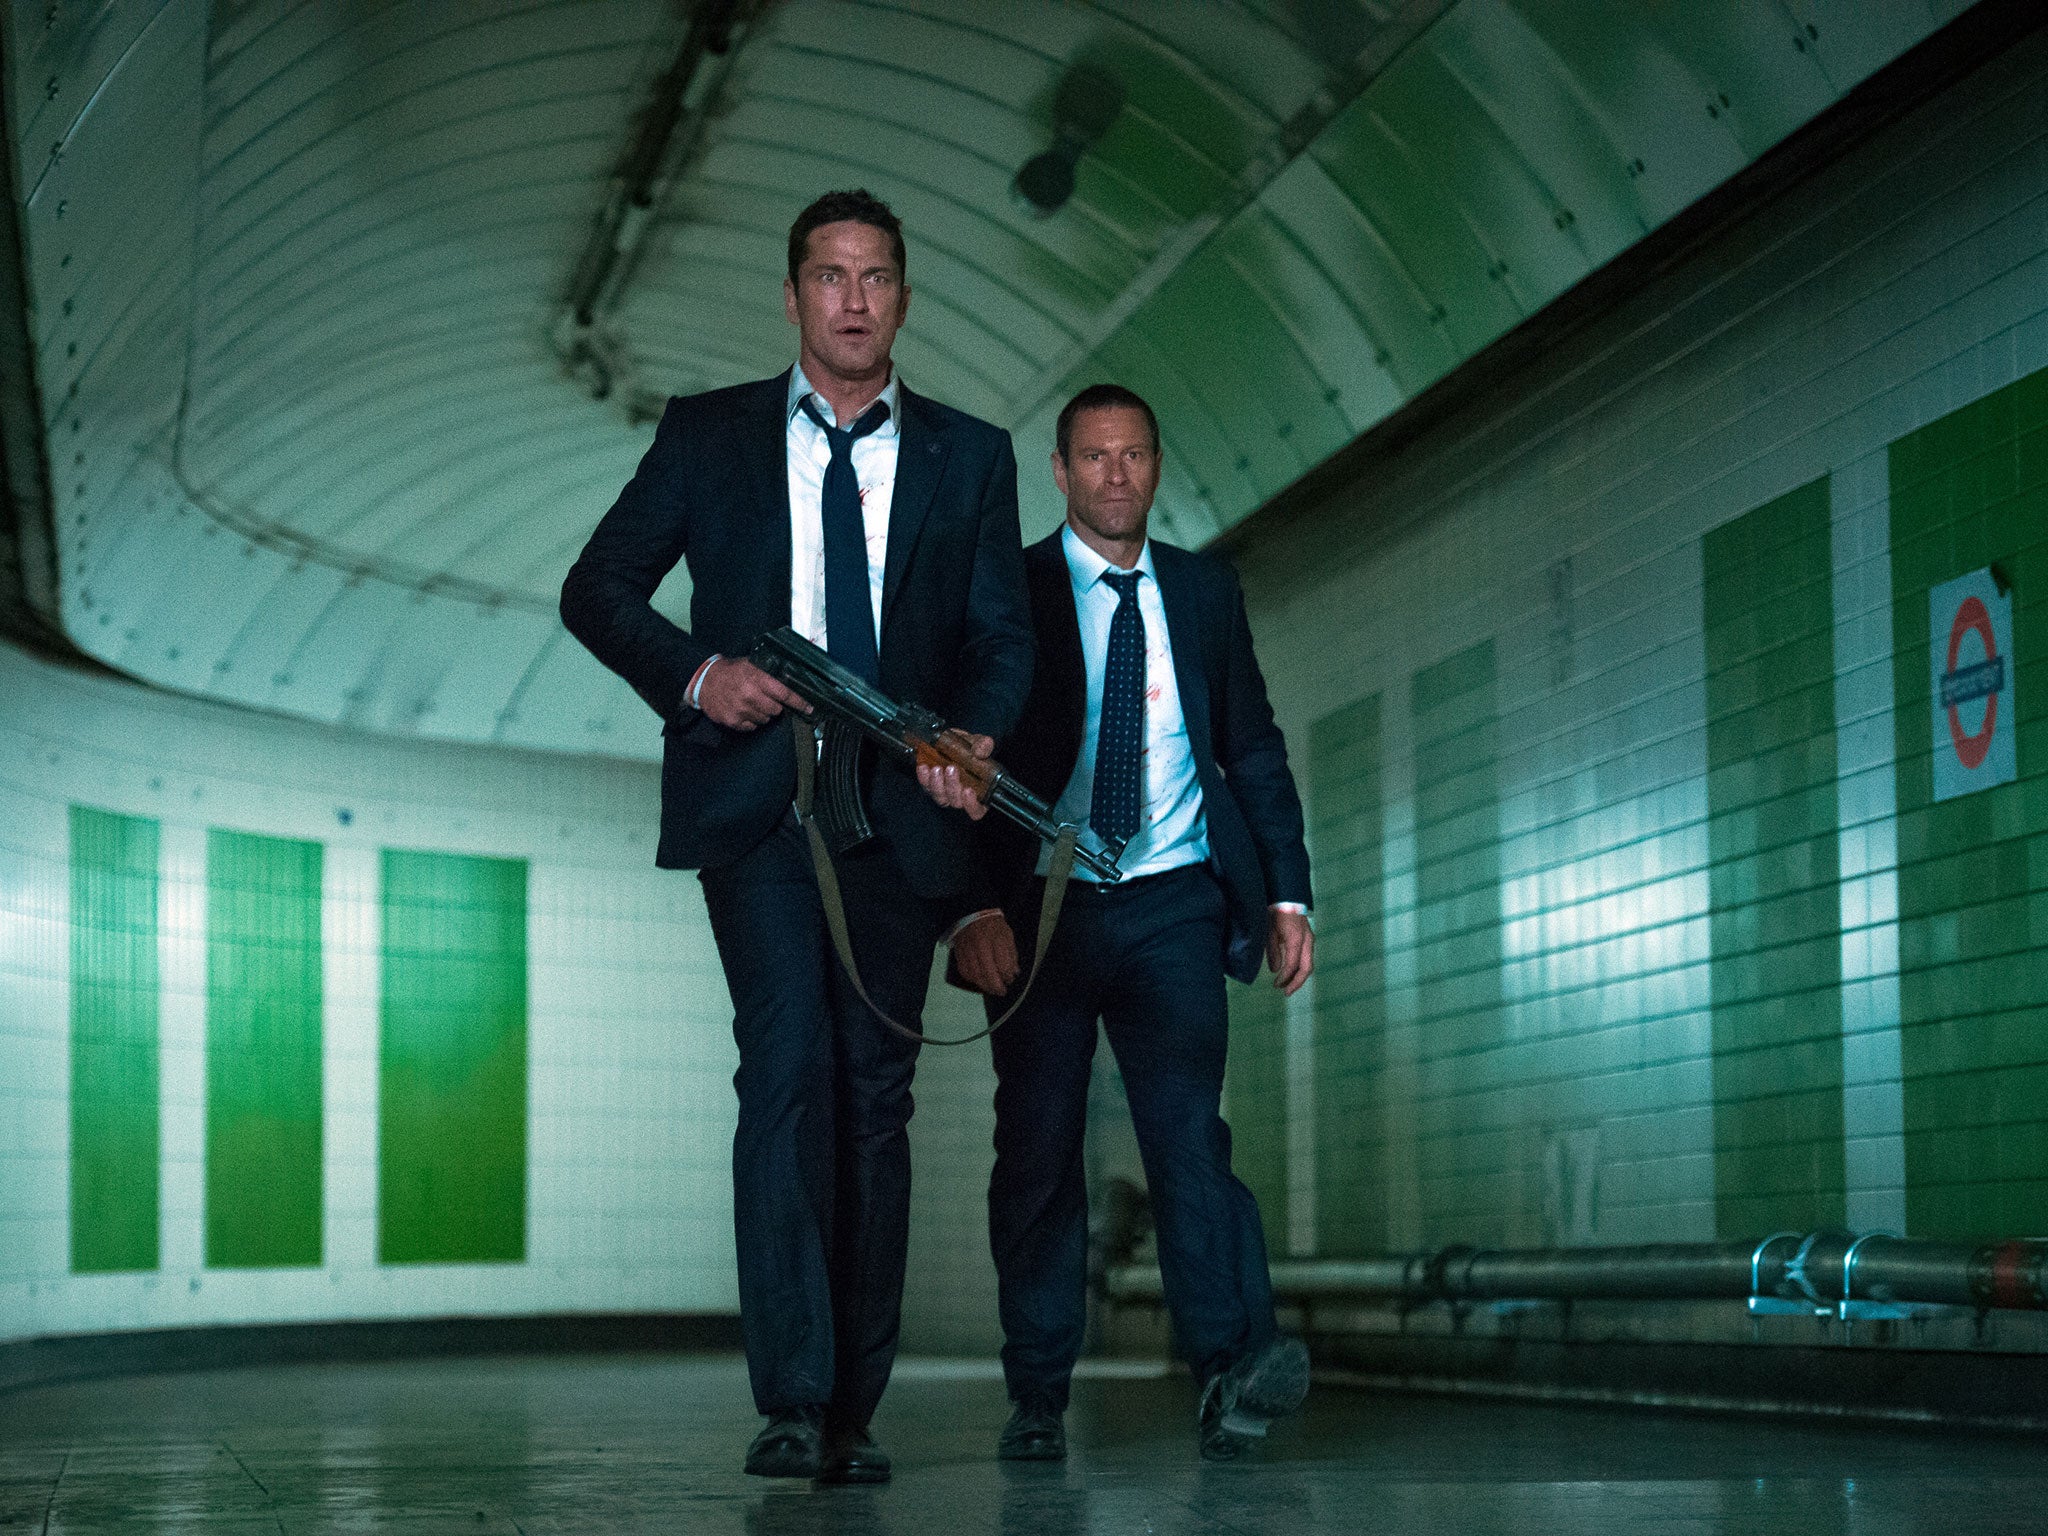 Gerard Butler and Aaron Eckhart going underground in the silly action movie ‘London Has Fallen’